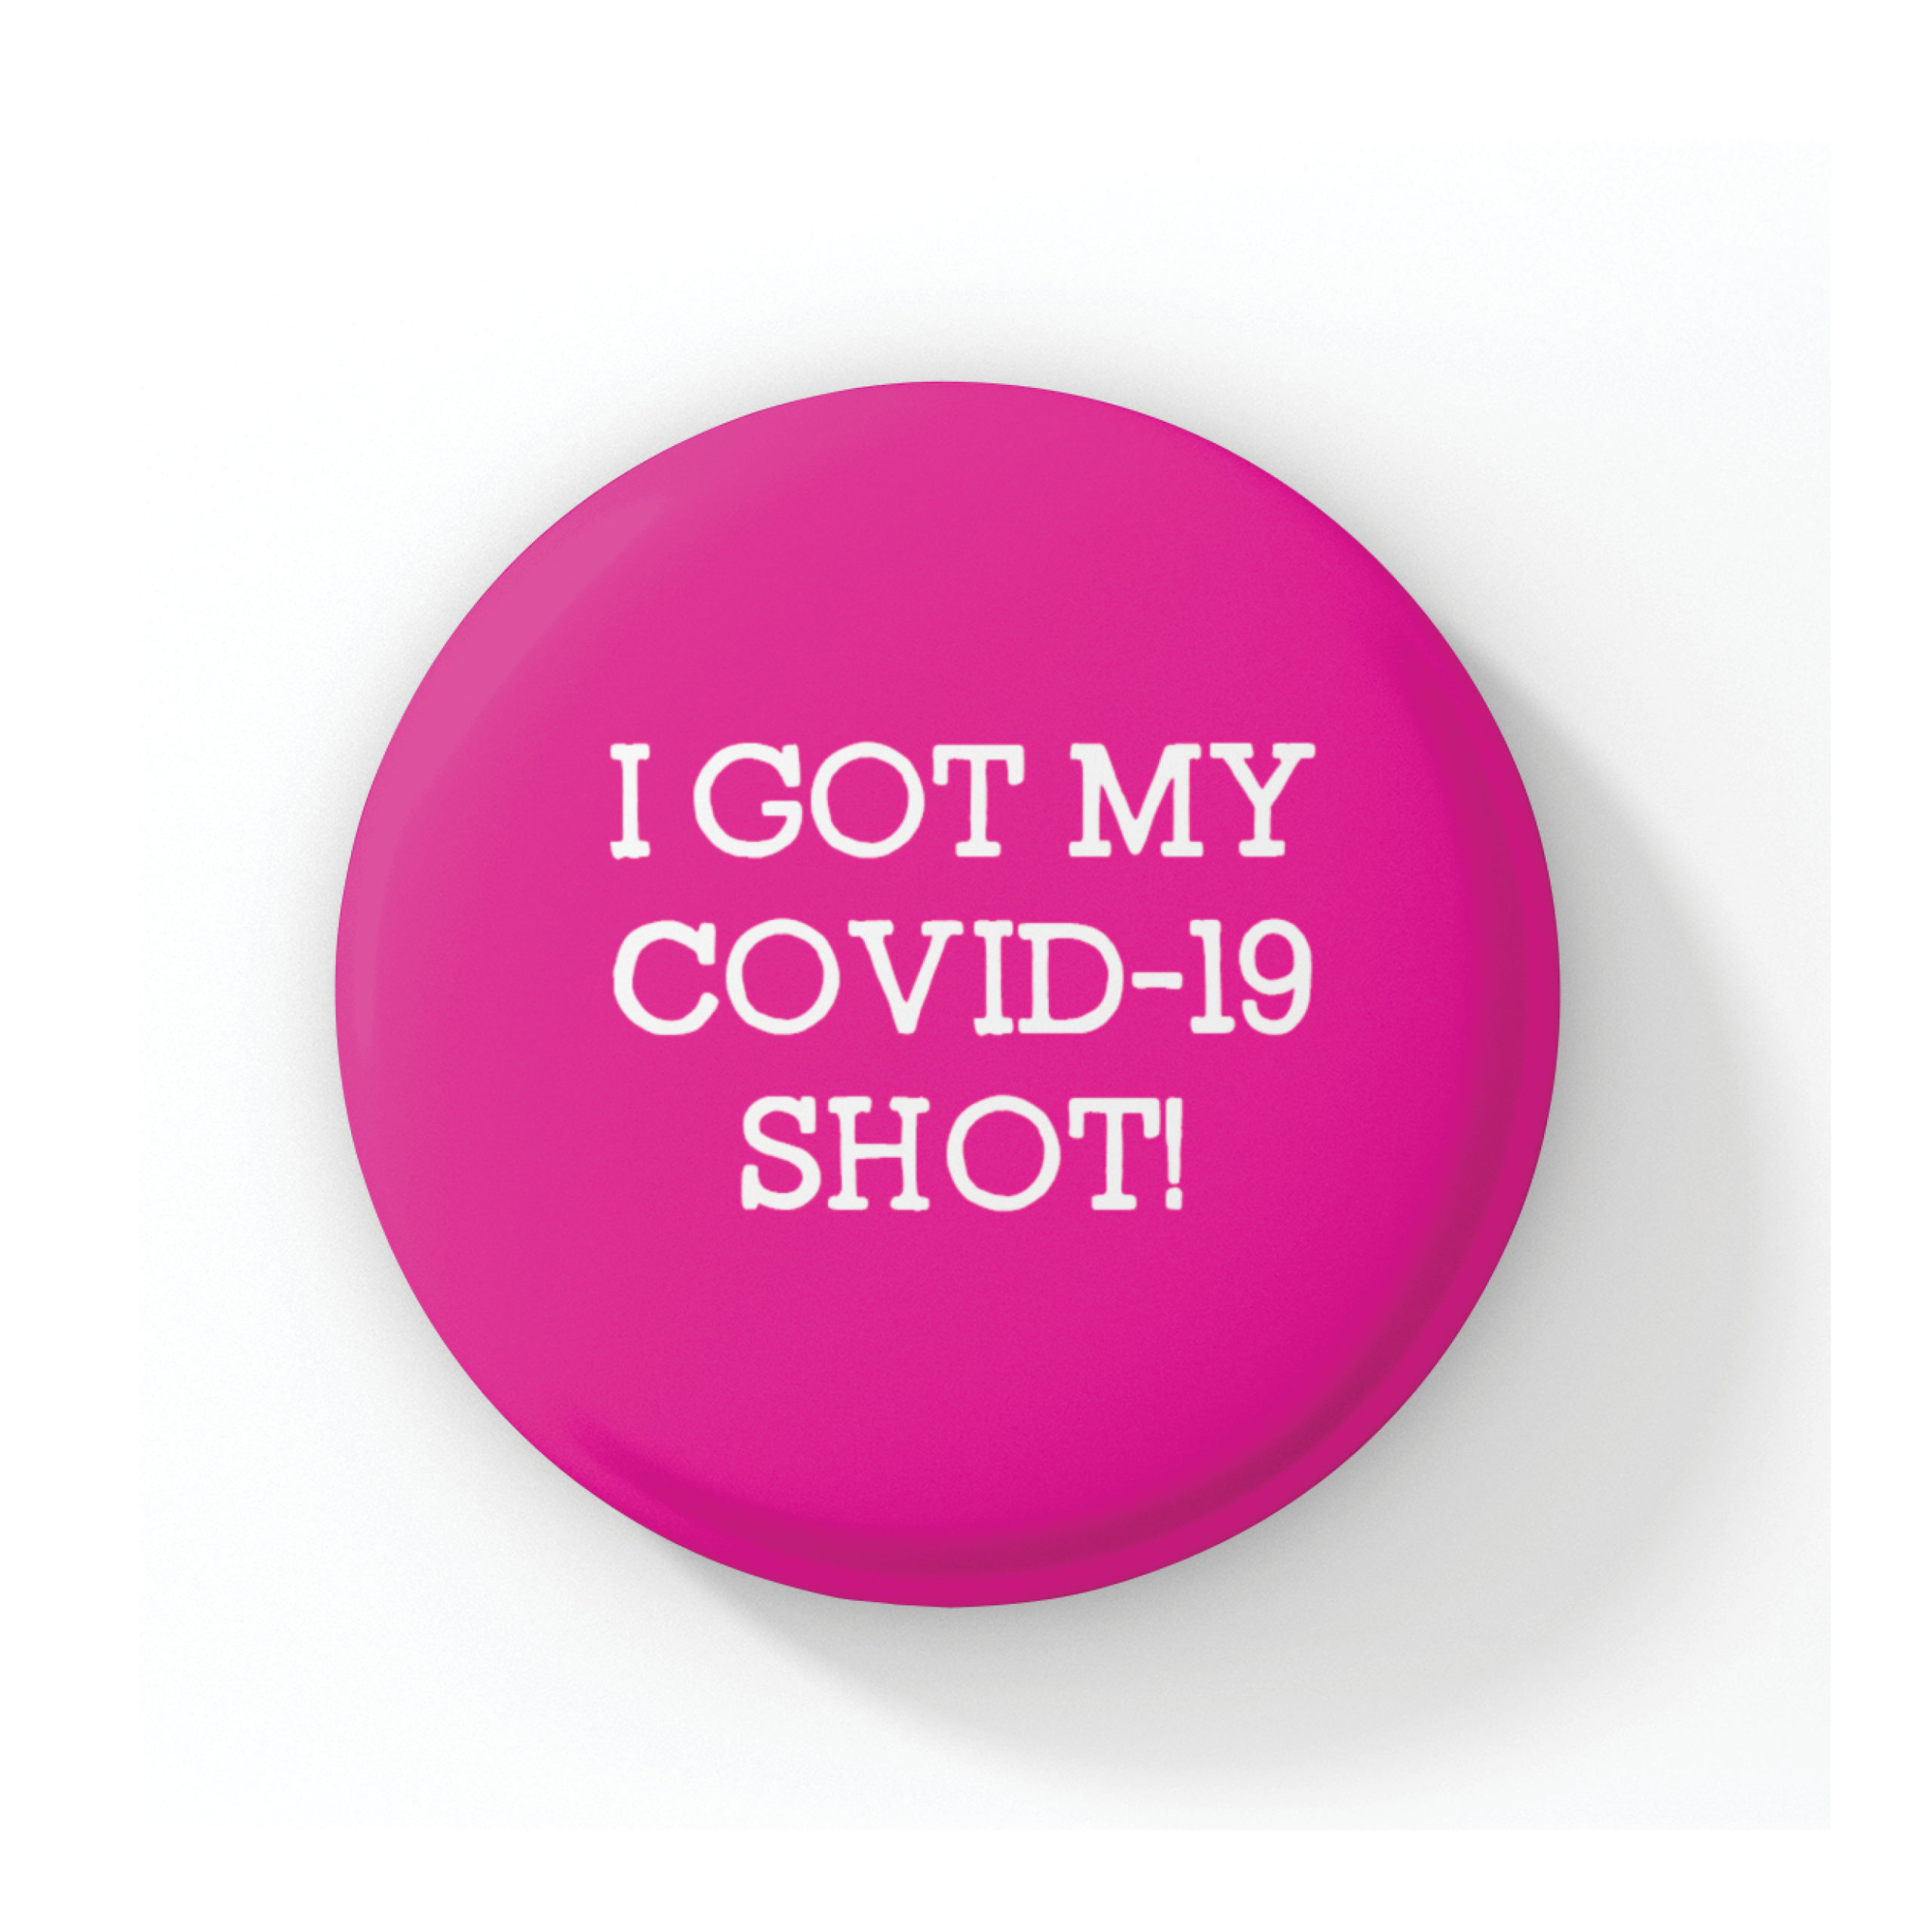 COVID-19 Vaccine Button – Colorful Hot Pink